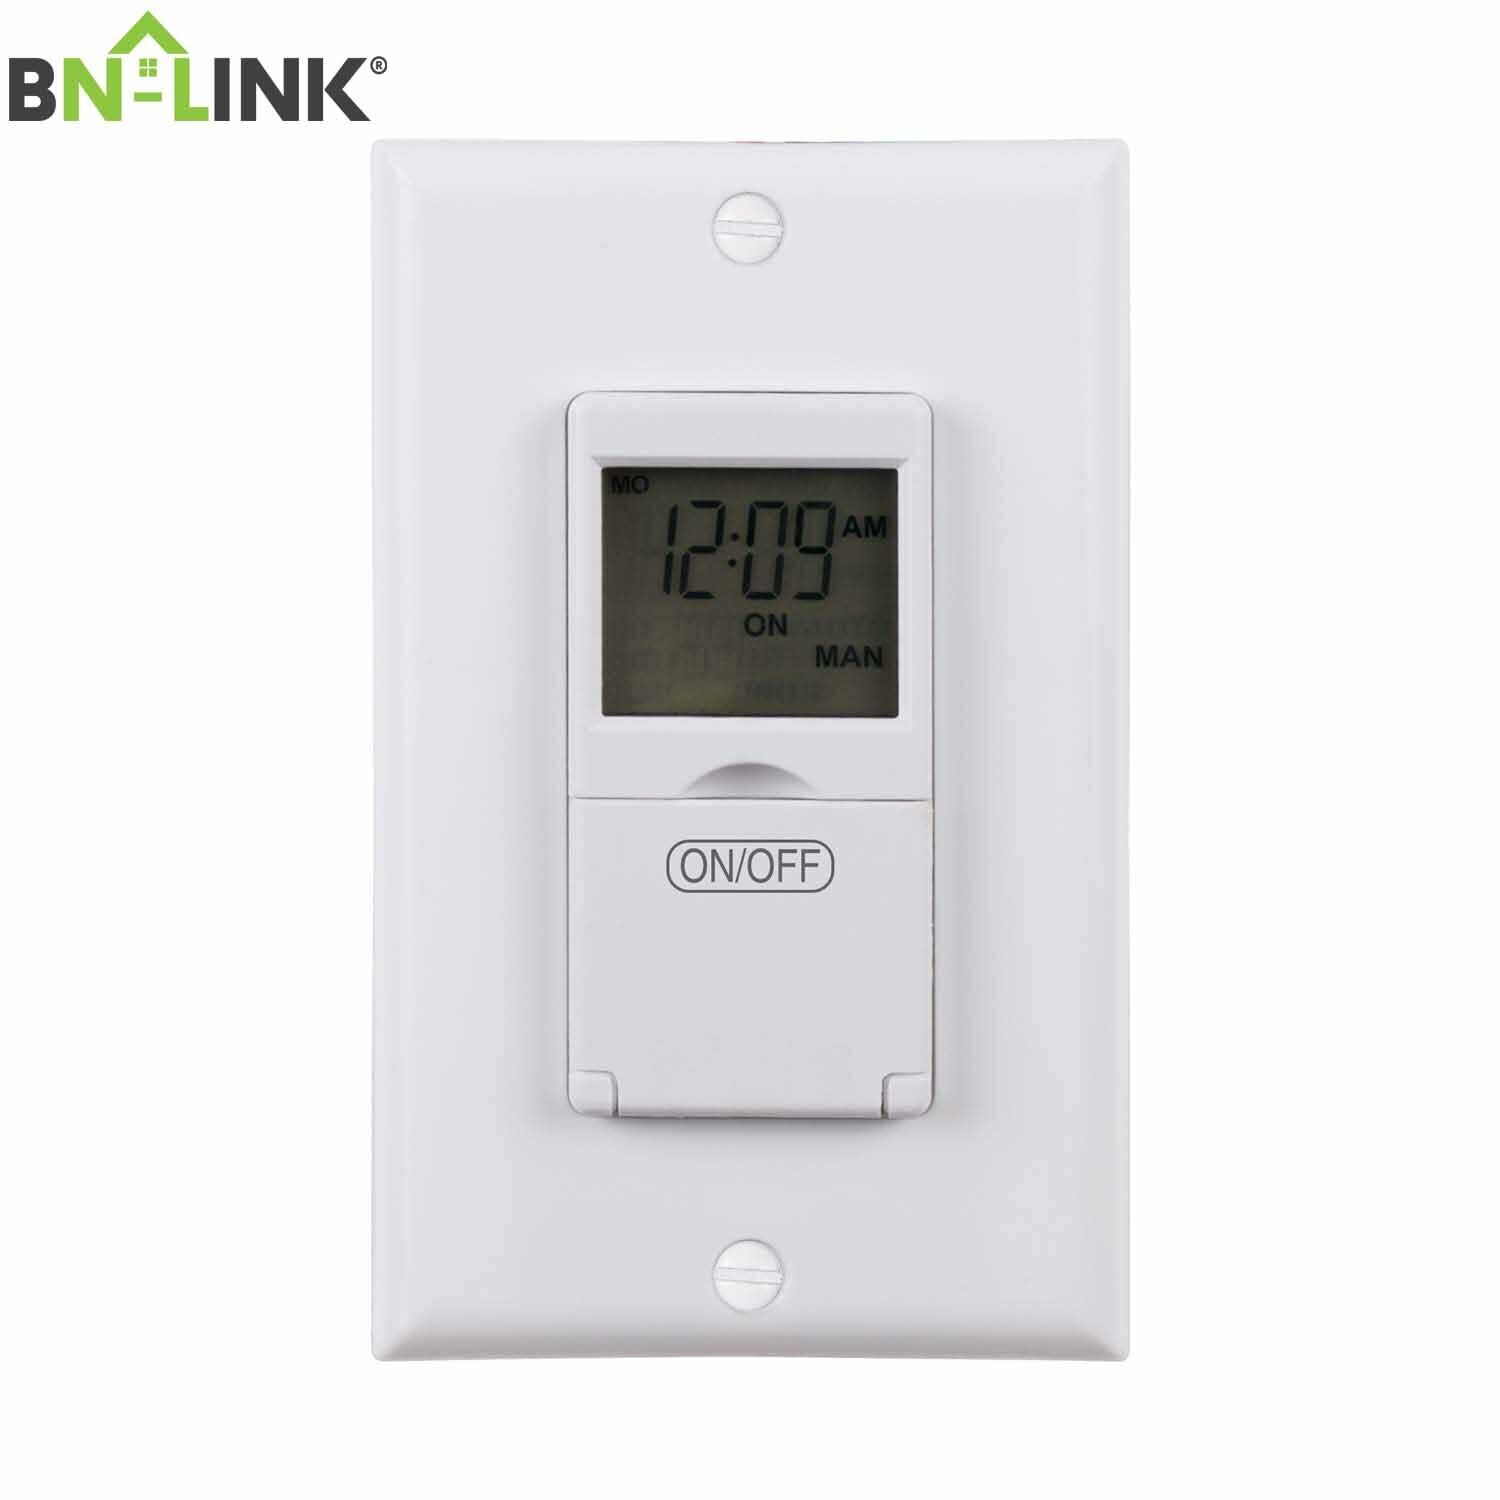 BN-LINK 7 Day Programmable In-Wall Timer Switch Digital for Fans, Lights, Motors BN-LINK BND-60/SU101C